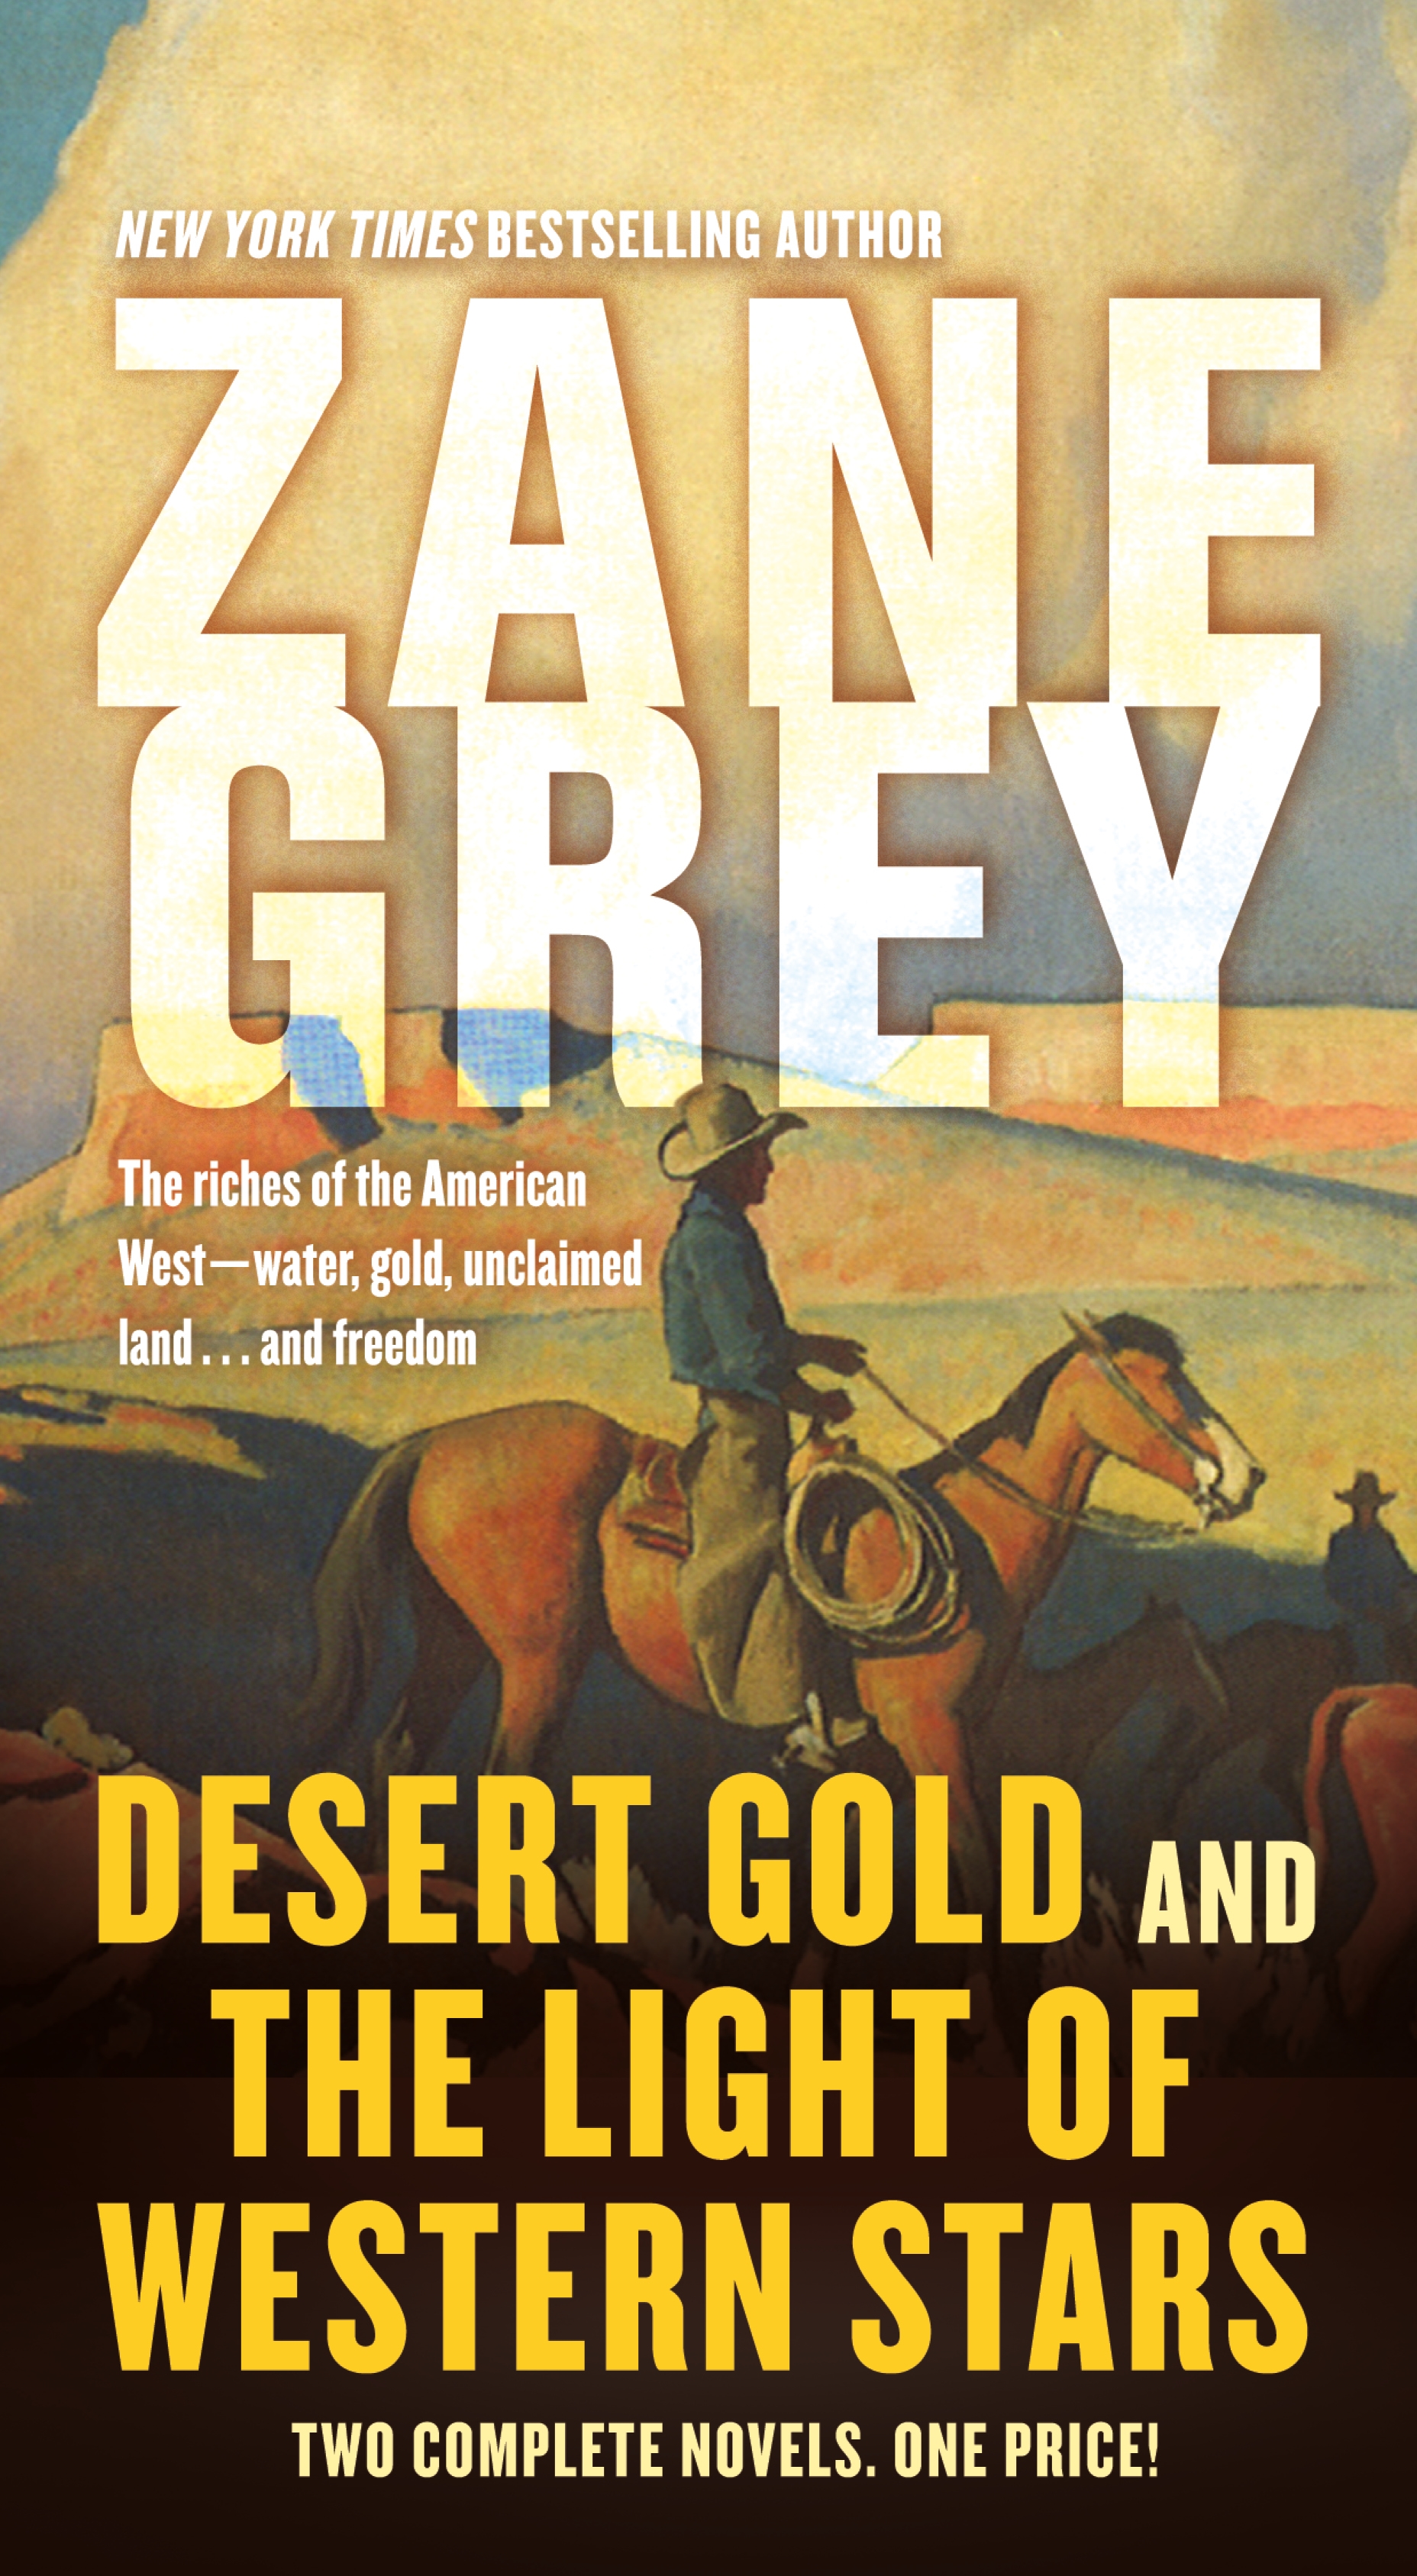 Desert Gold and The Light of Western Stars : Two Complete Novels by Zane Grey